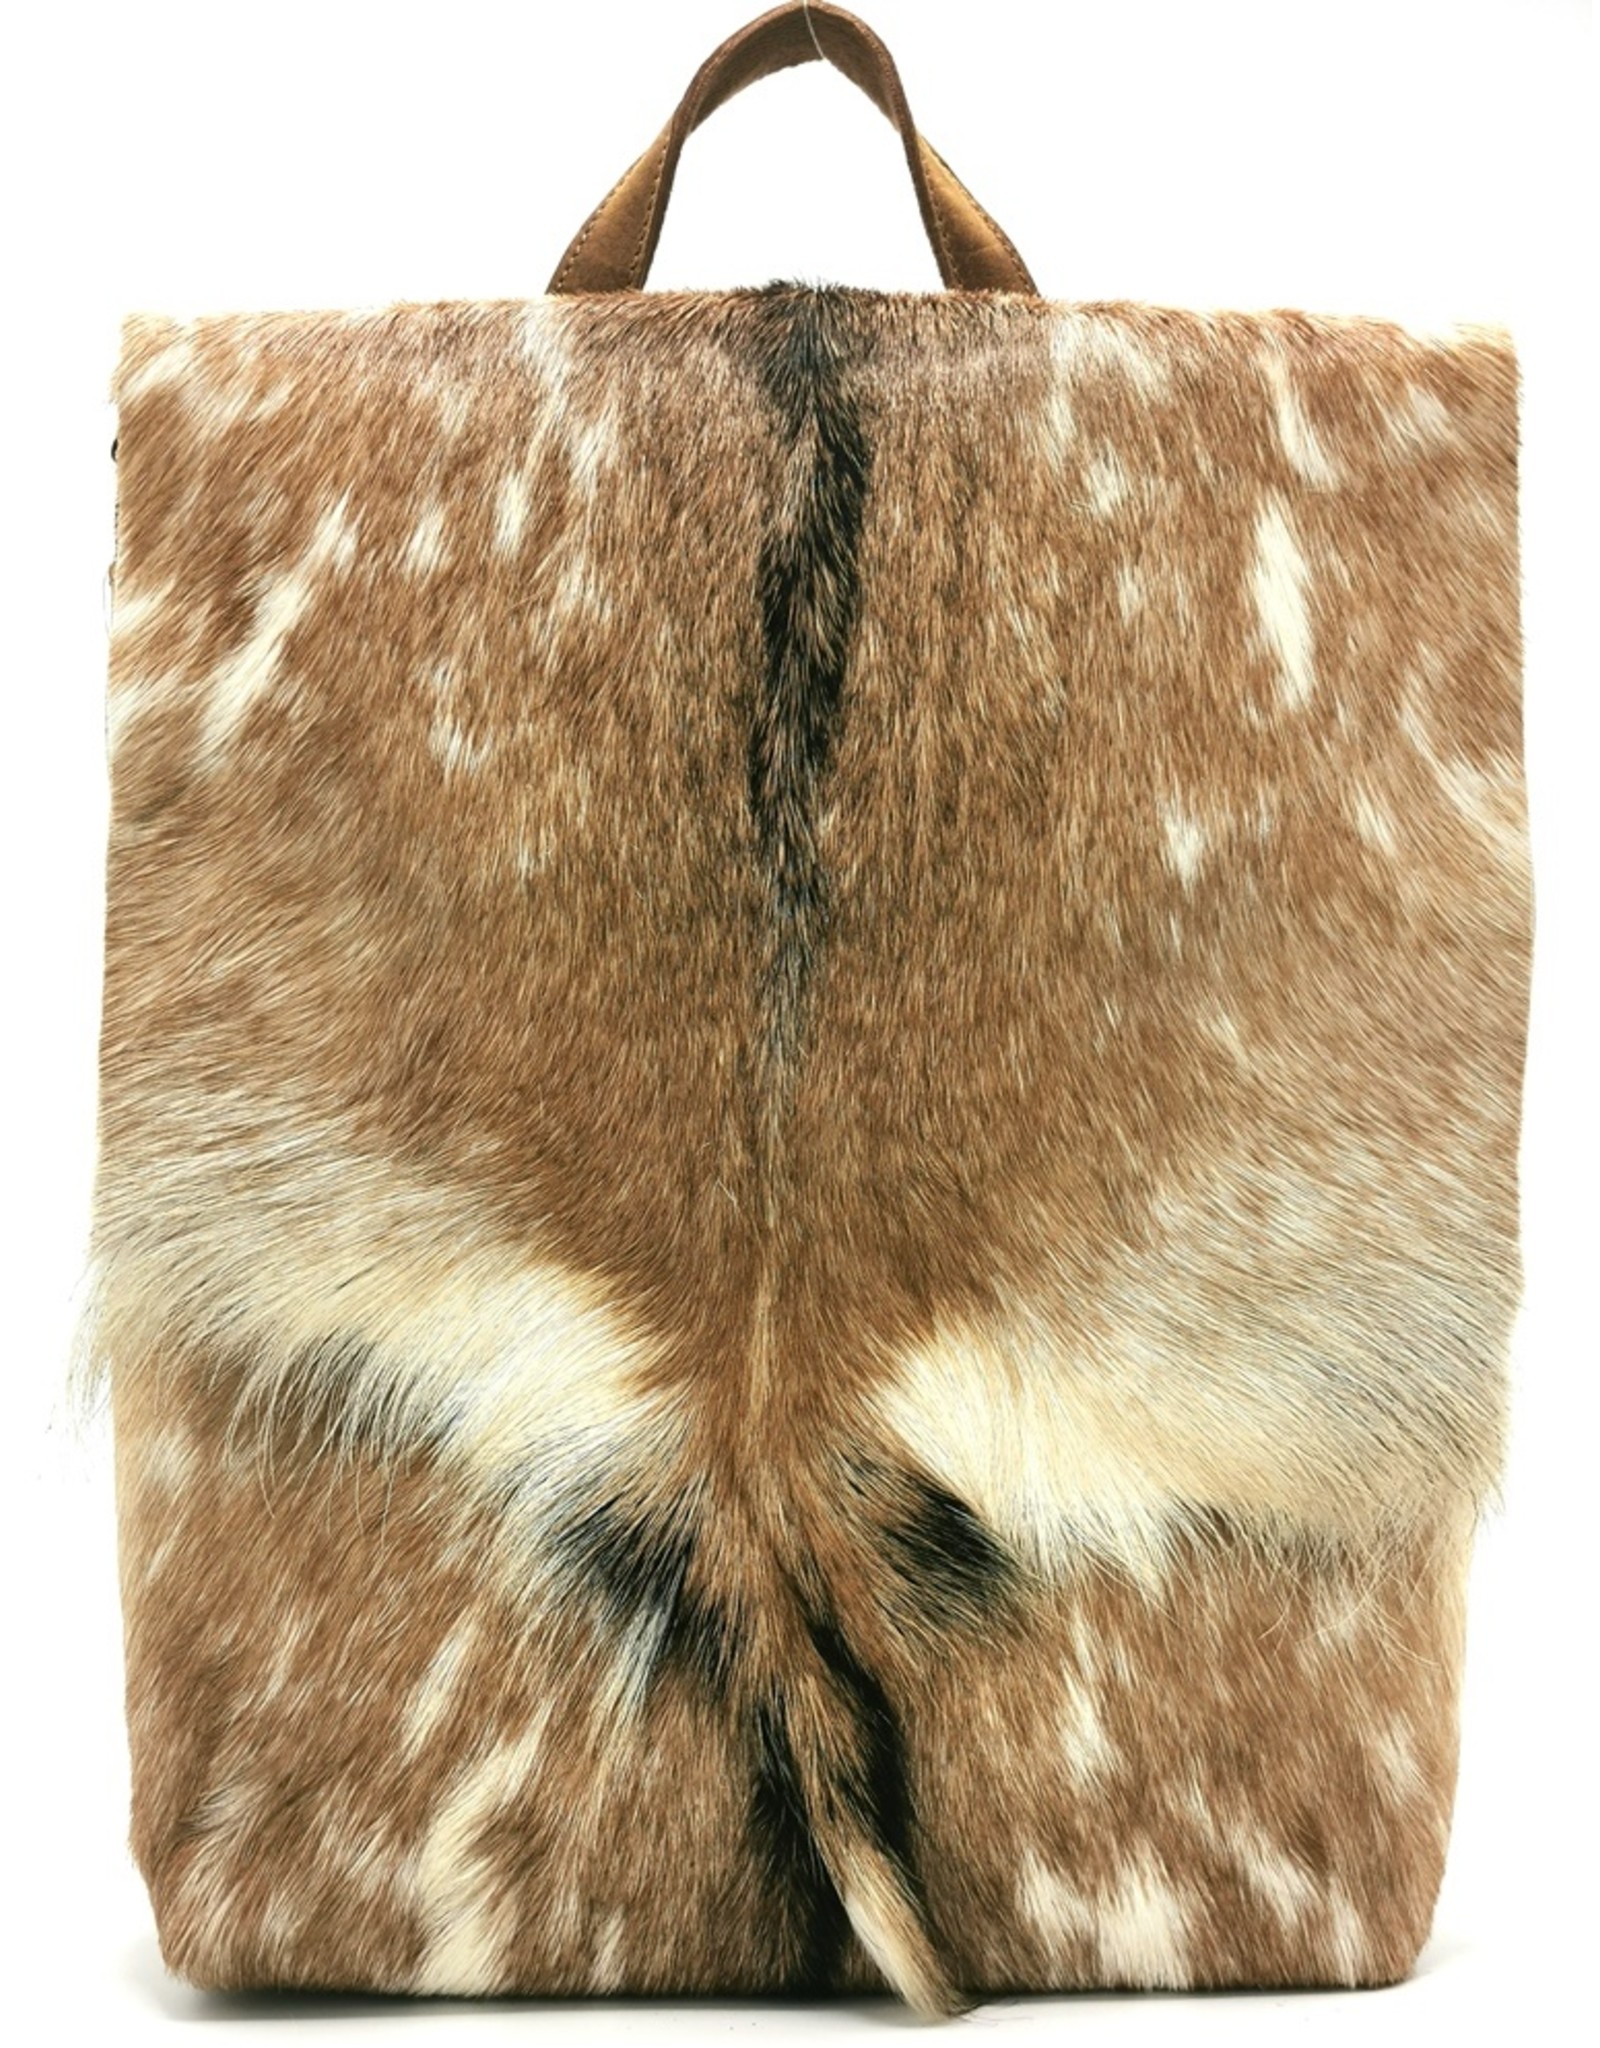 Hide & Stitches Leather backpacks  and leather shoppers - Hide & Stitches Leather Backpack with Fur Cover Brown - 2